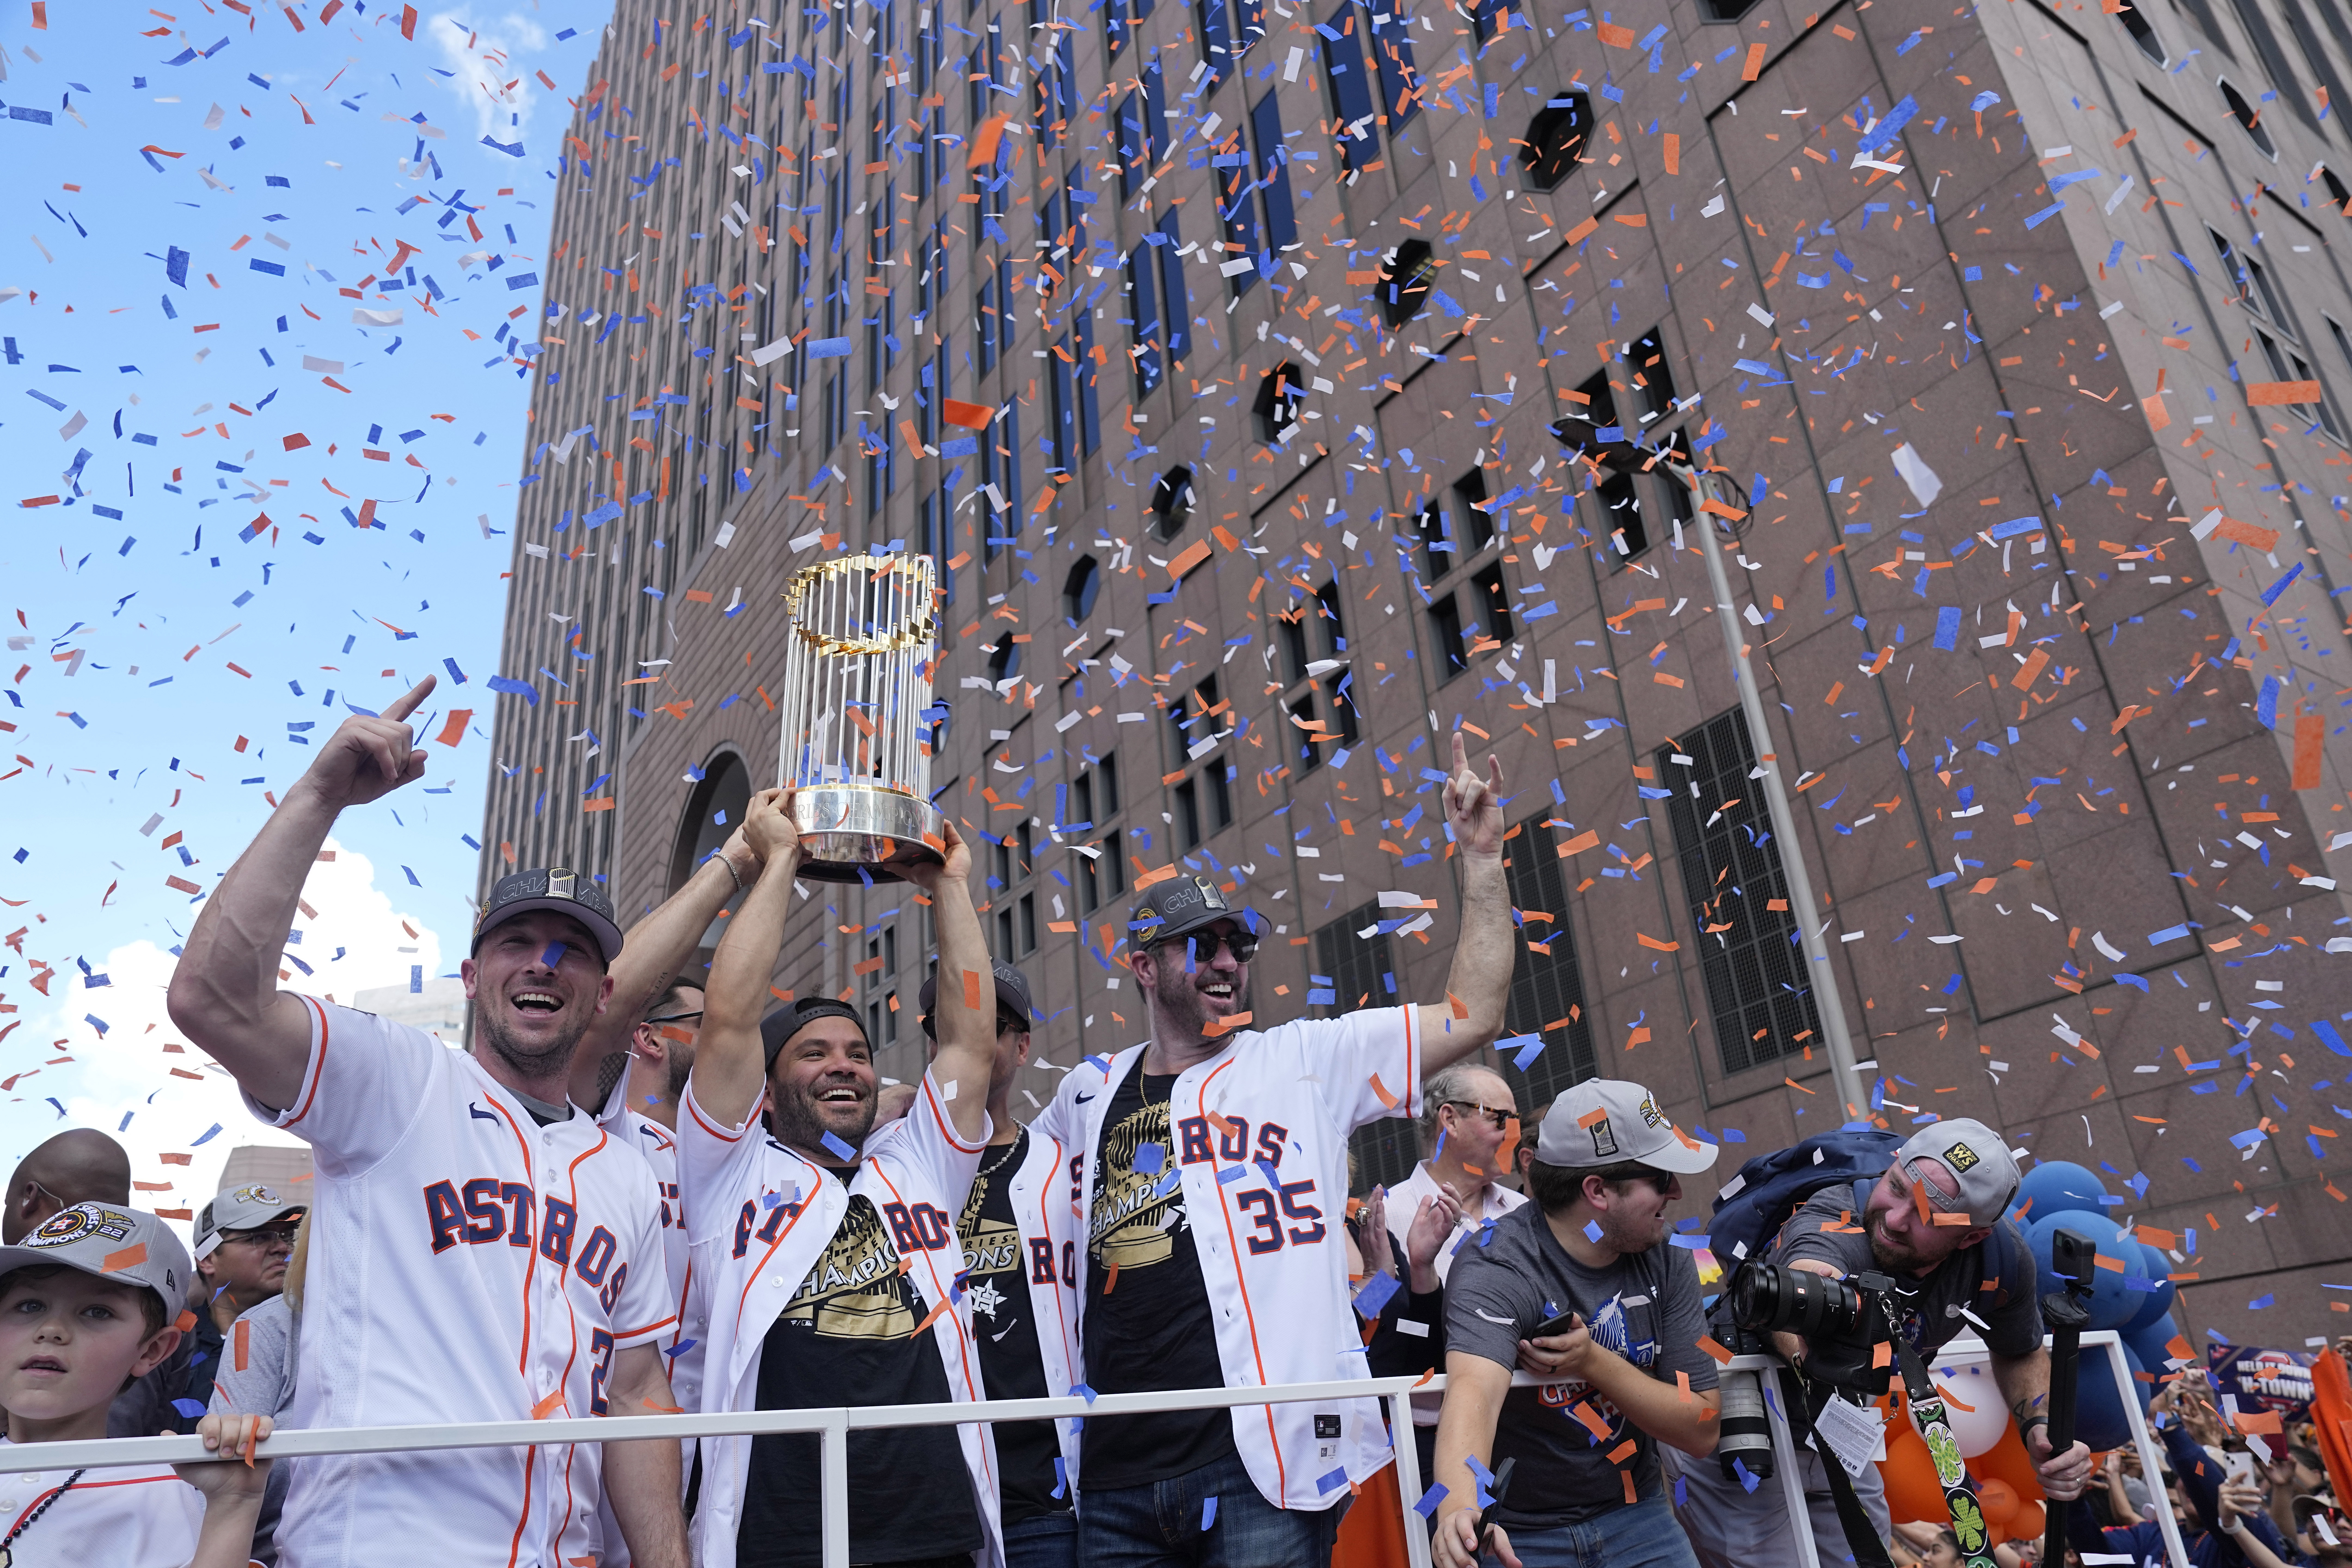 Houston Astros: Photos, videos from World Series downtown parade